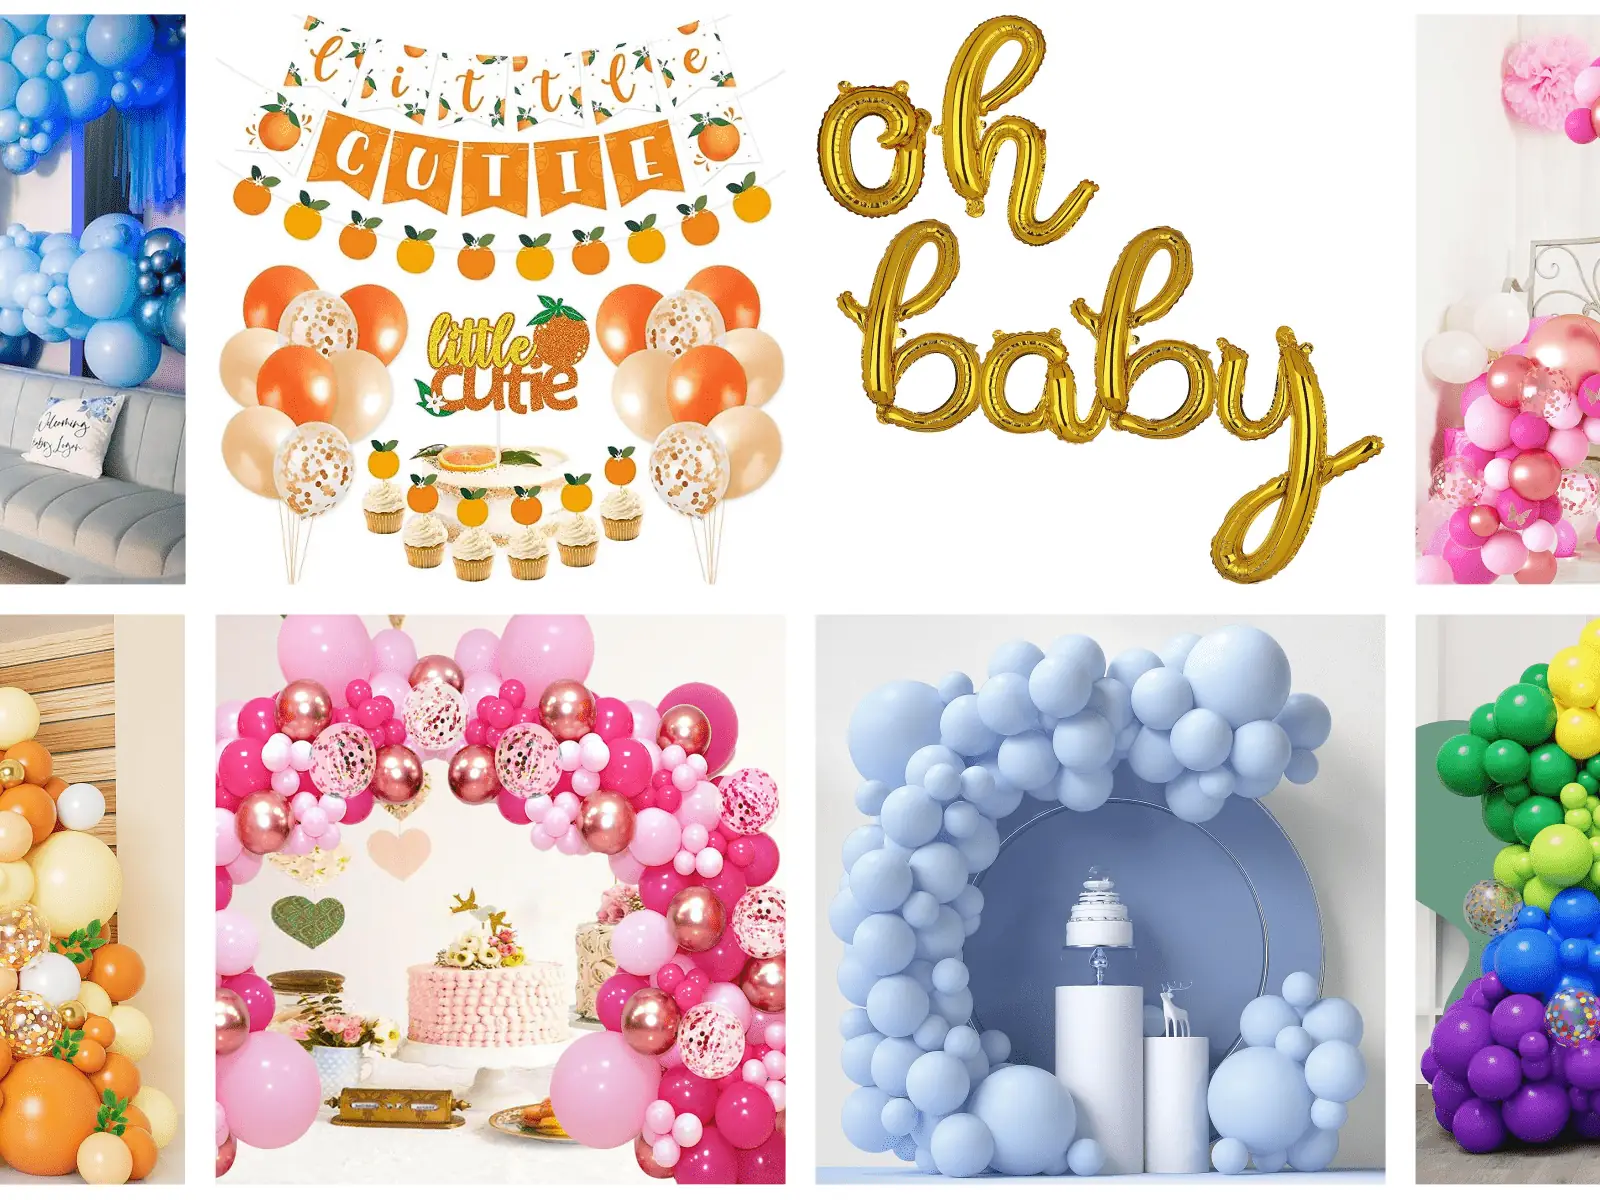 Quick and Easy Baby Shower Decorating Create a charming and personalized baby shower with this guide. Choose themes,